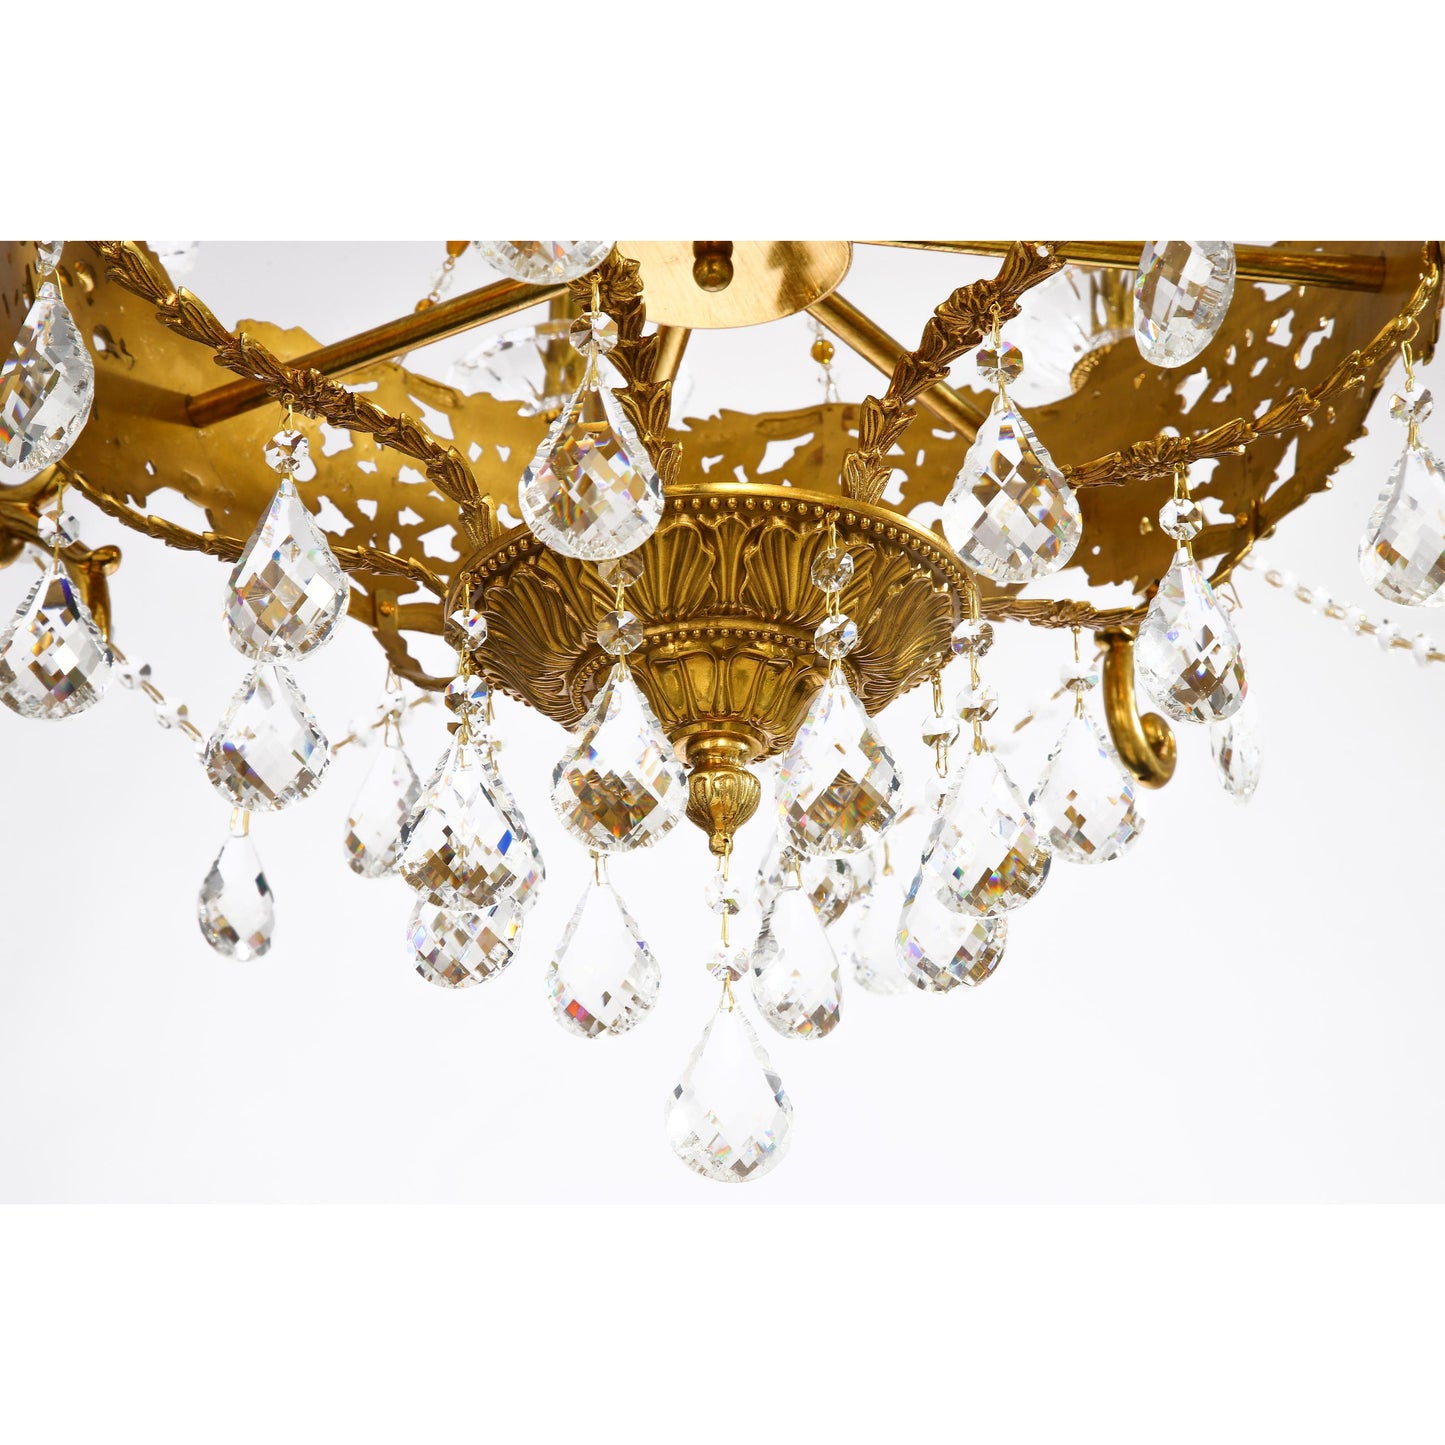 Eight Arm Chandelier with Large Crystal Prisms And Intricate Brass Patterns